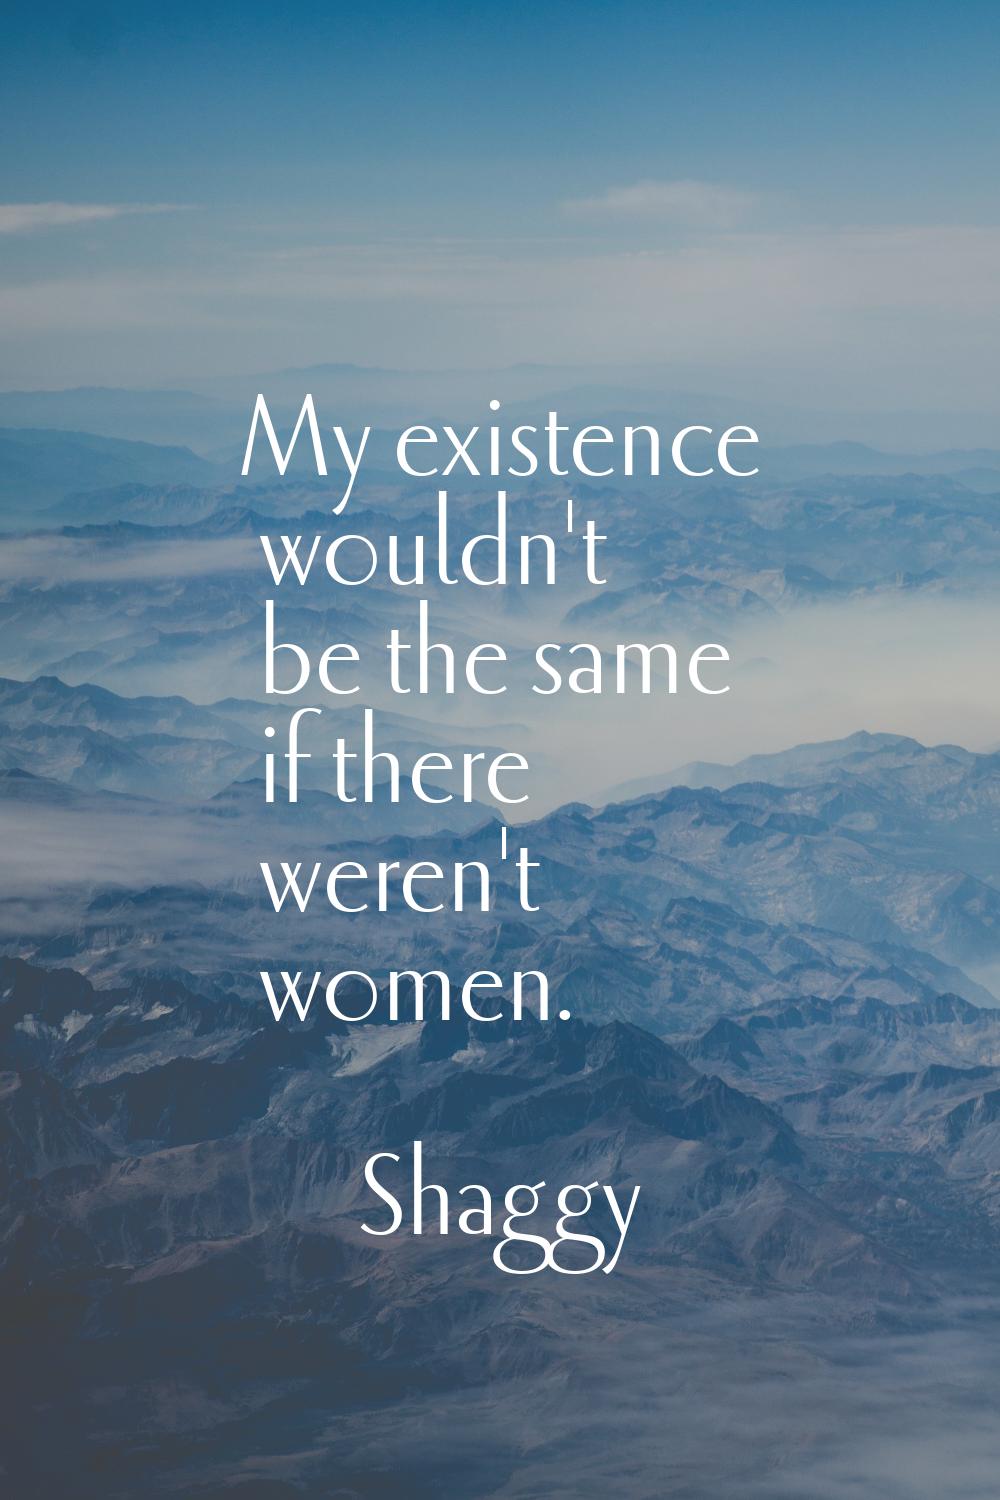 My existence wouldn't be the same if there weren't women.